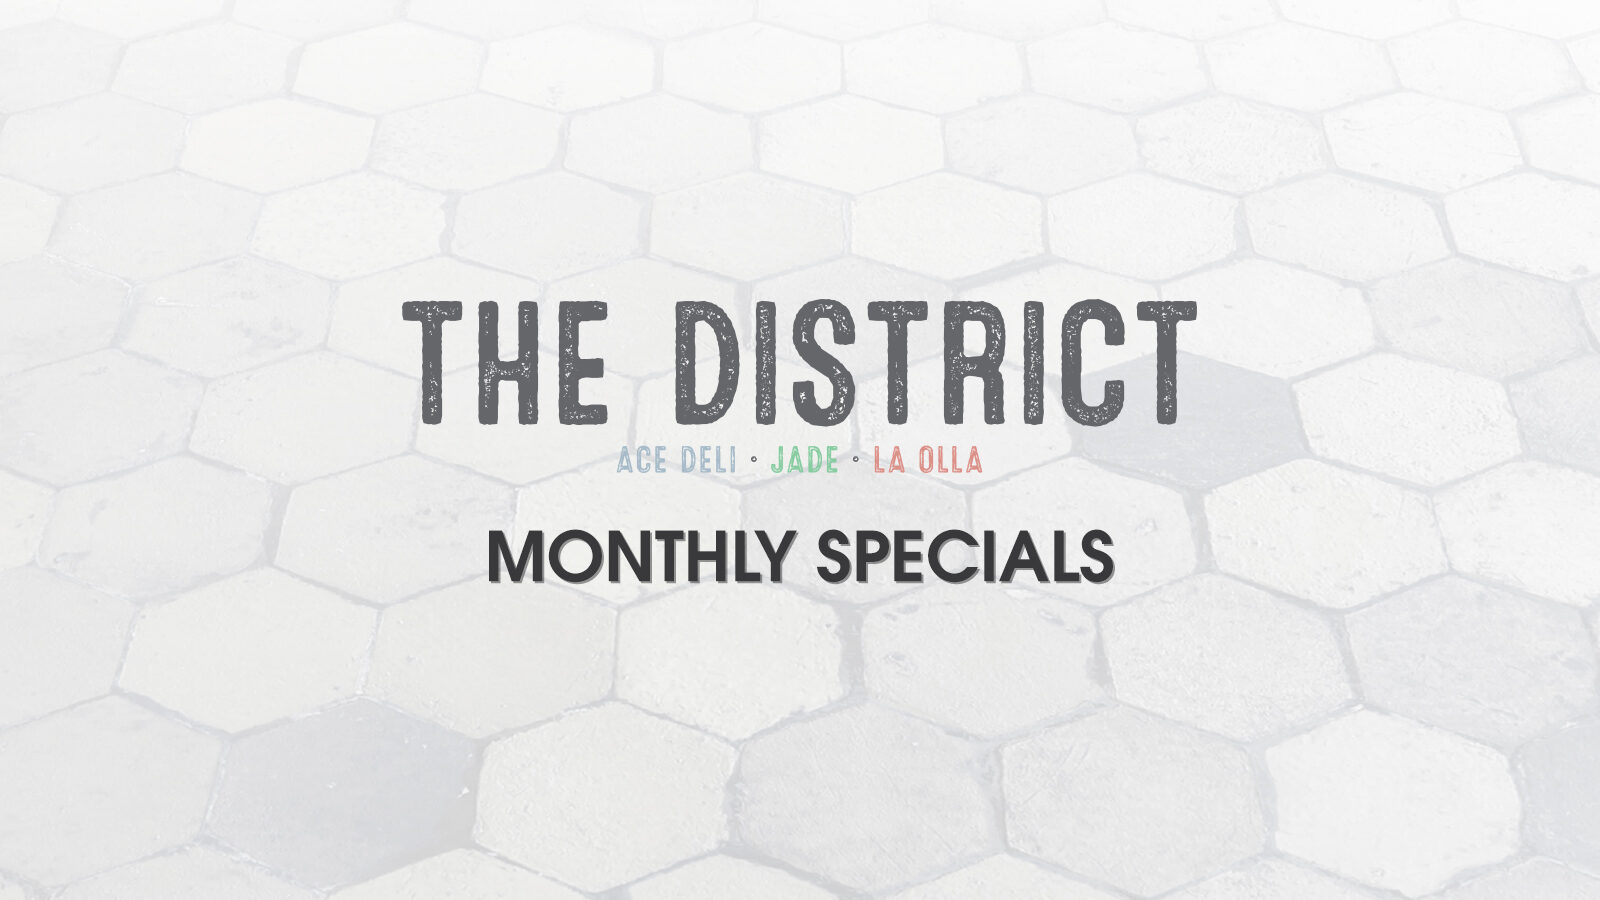 The District Monthly Specials